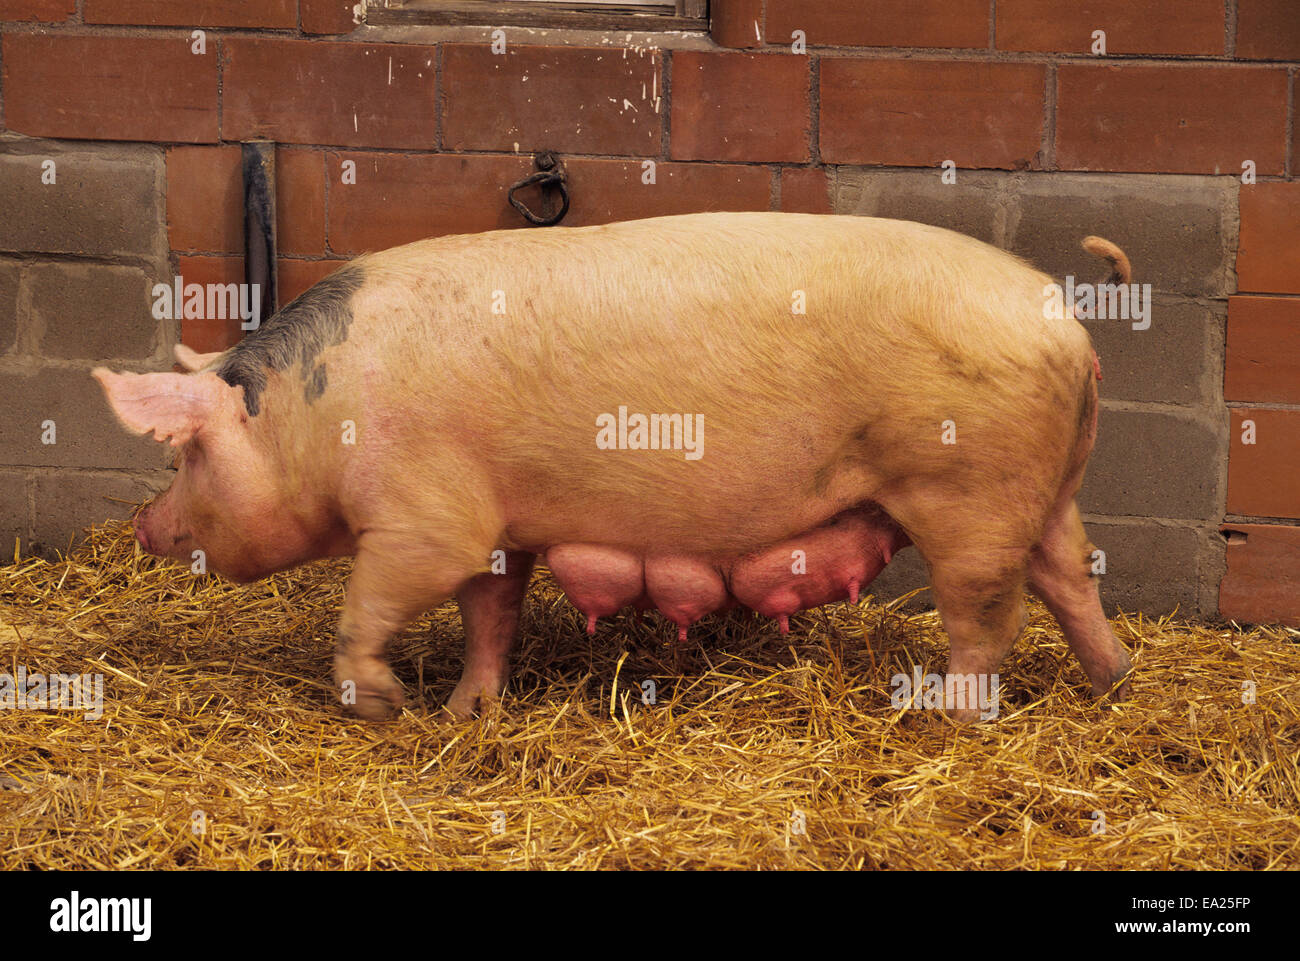 Livestock - Sideview of a sow pig with full udders / near Vermilion, Minnesota, USA. Stock Photo